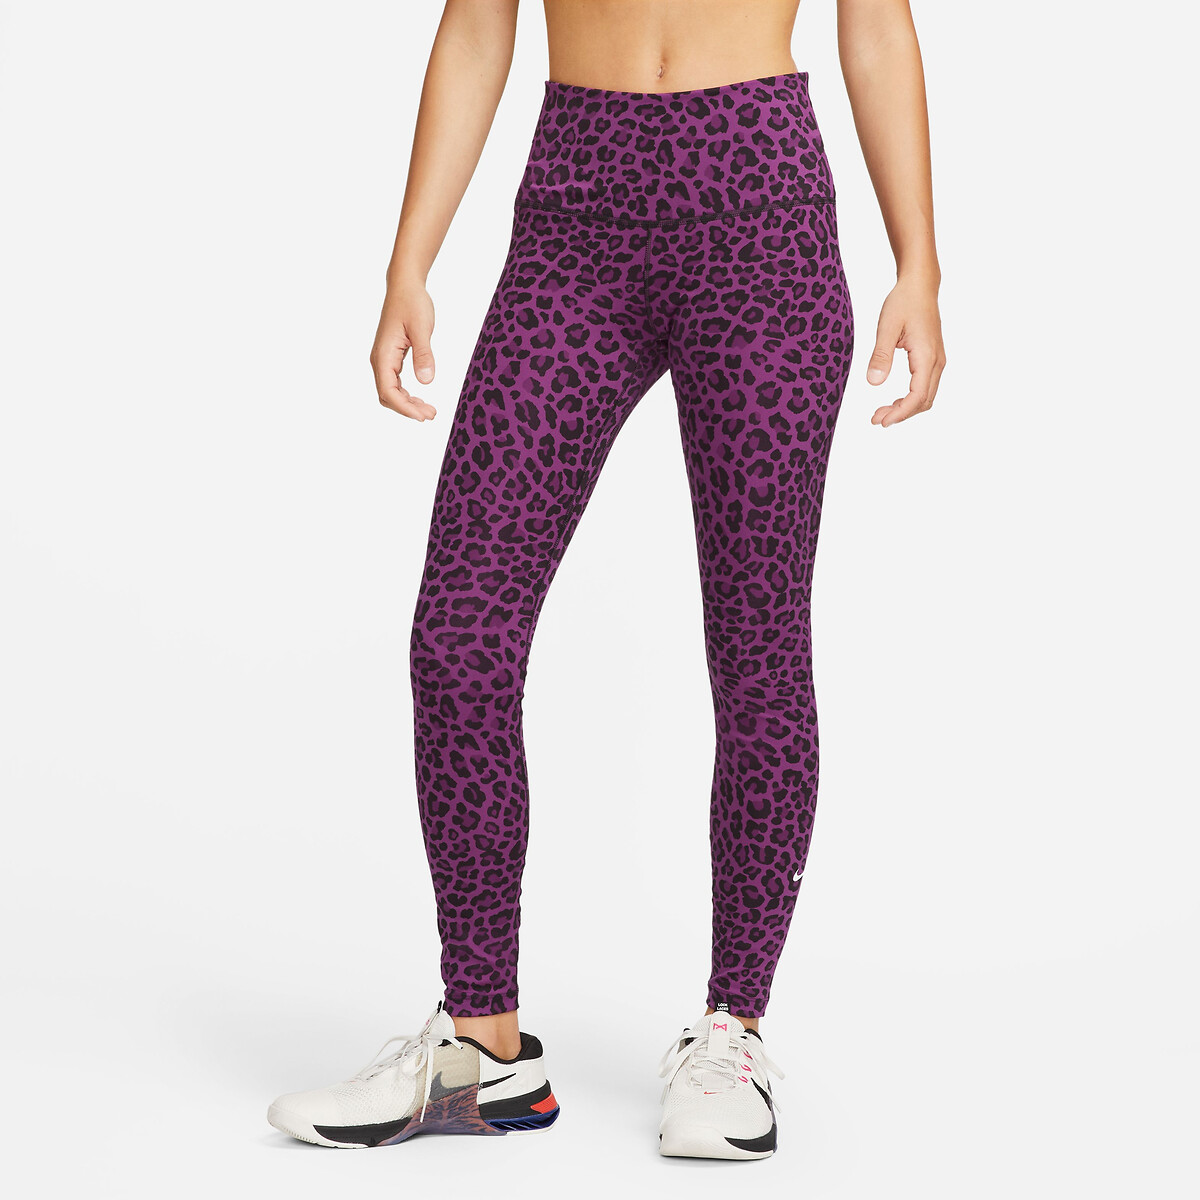 NIKE Floral Print Women Multicolor Tights - Buy NIKE Floral Print Women  Multicolor Tights Online at Best Prices in India | Flipkart.com